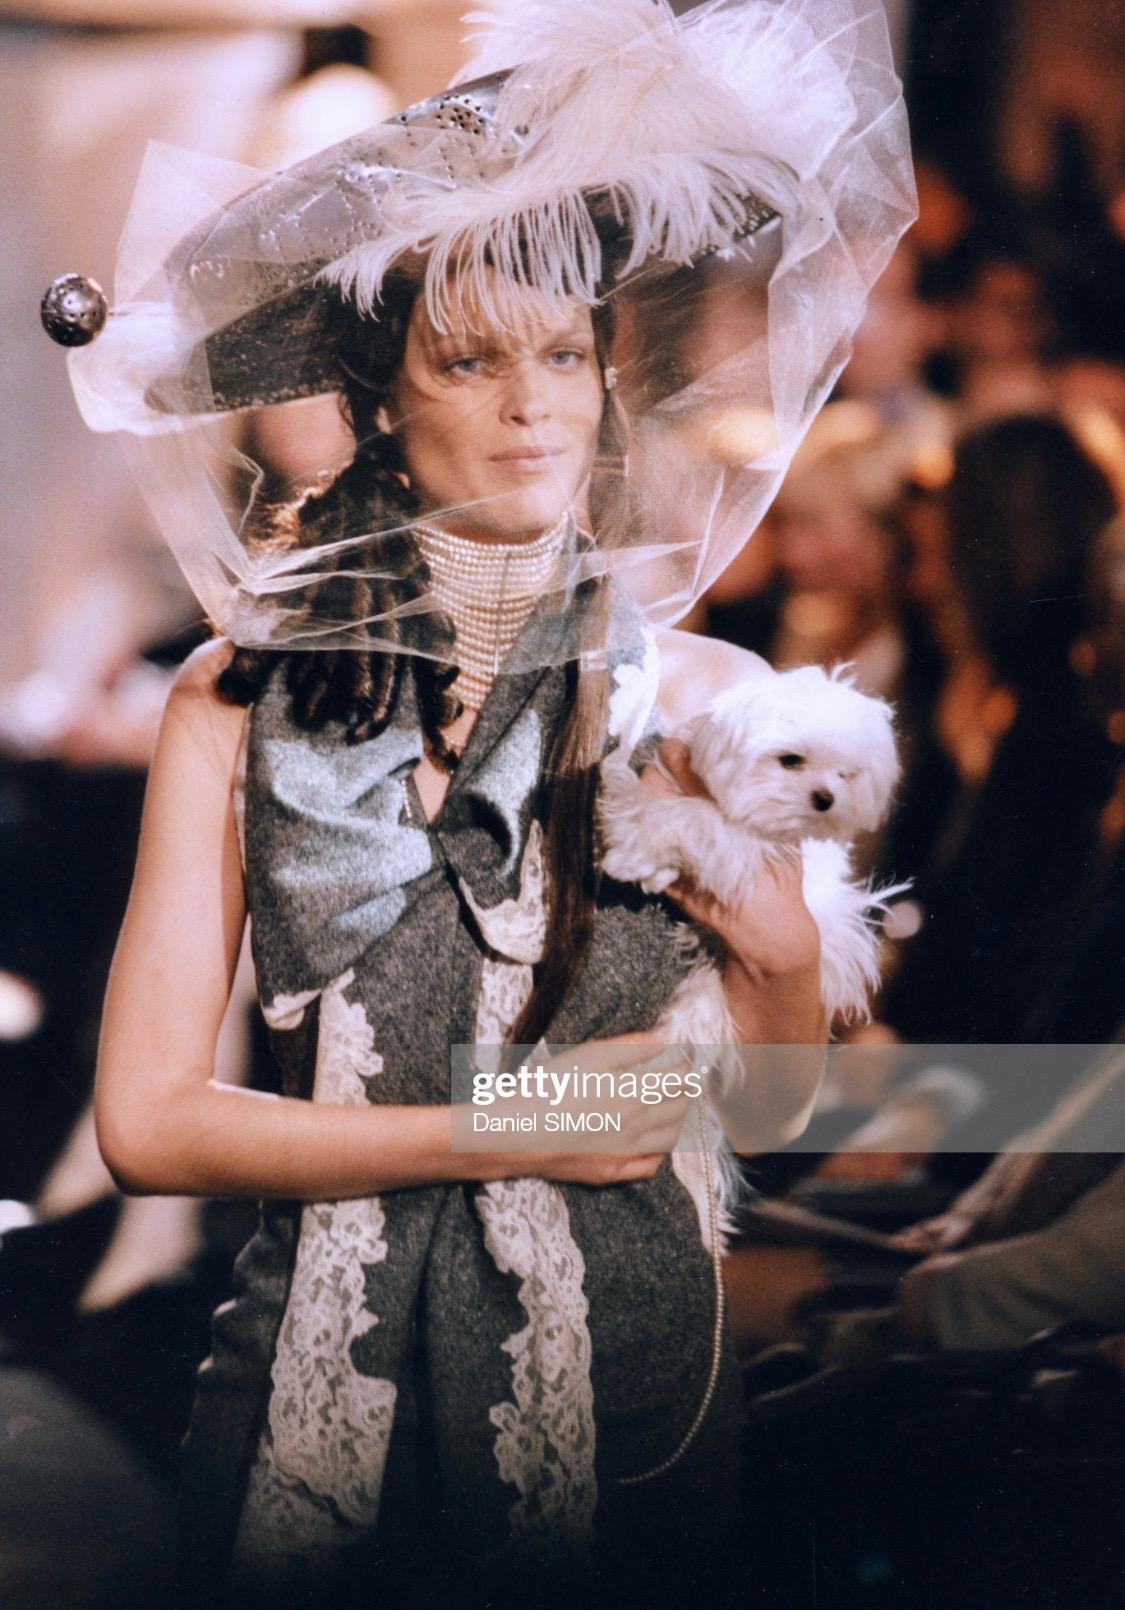 Presenting a lace-trimmed silk camisole designed by John Galliano for Christian Dior's Fall/Winter 1998 collection. A grey version of this lace trim design was featured in the Fall/Winter 1998 runway presentation on multiple looks. The matching